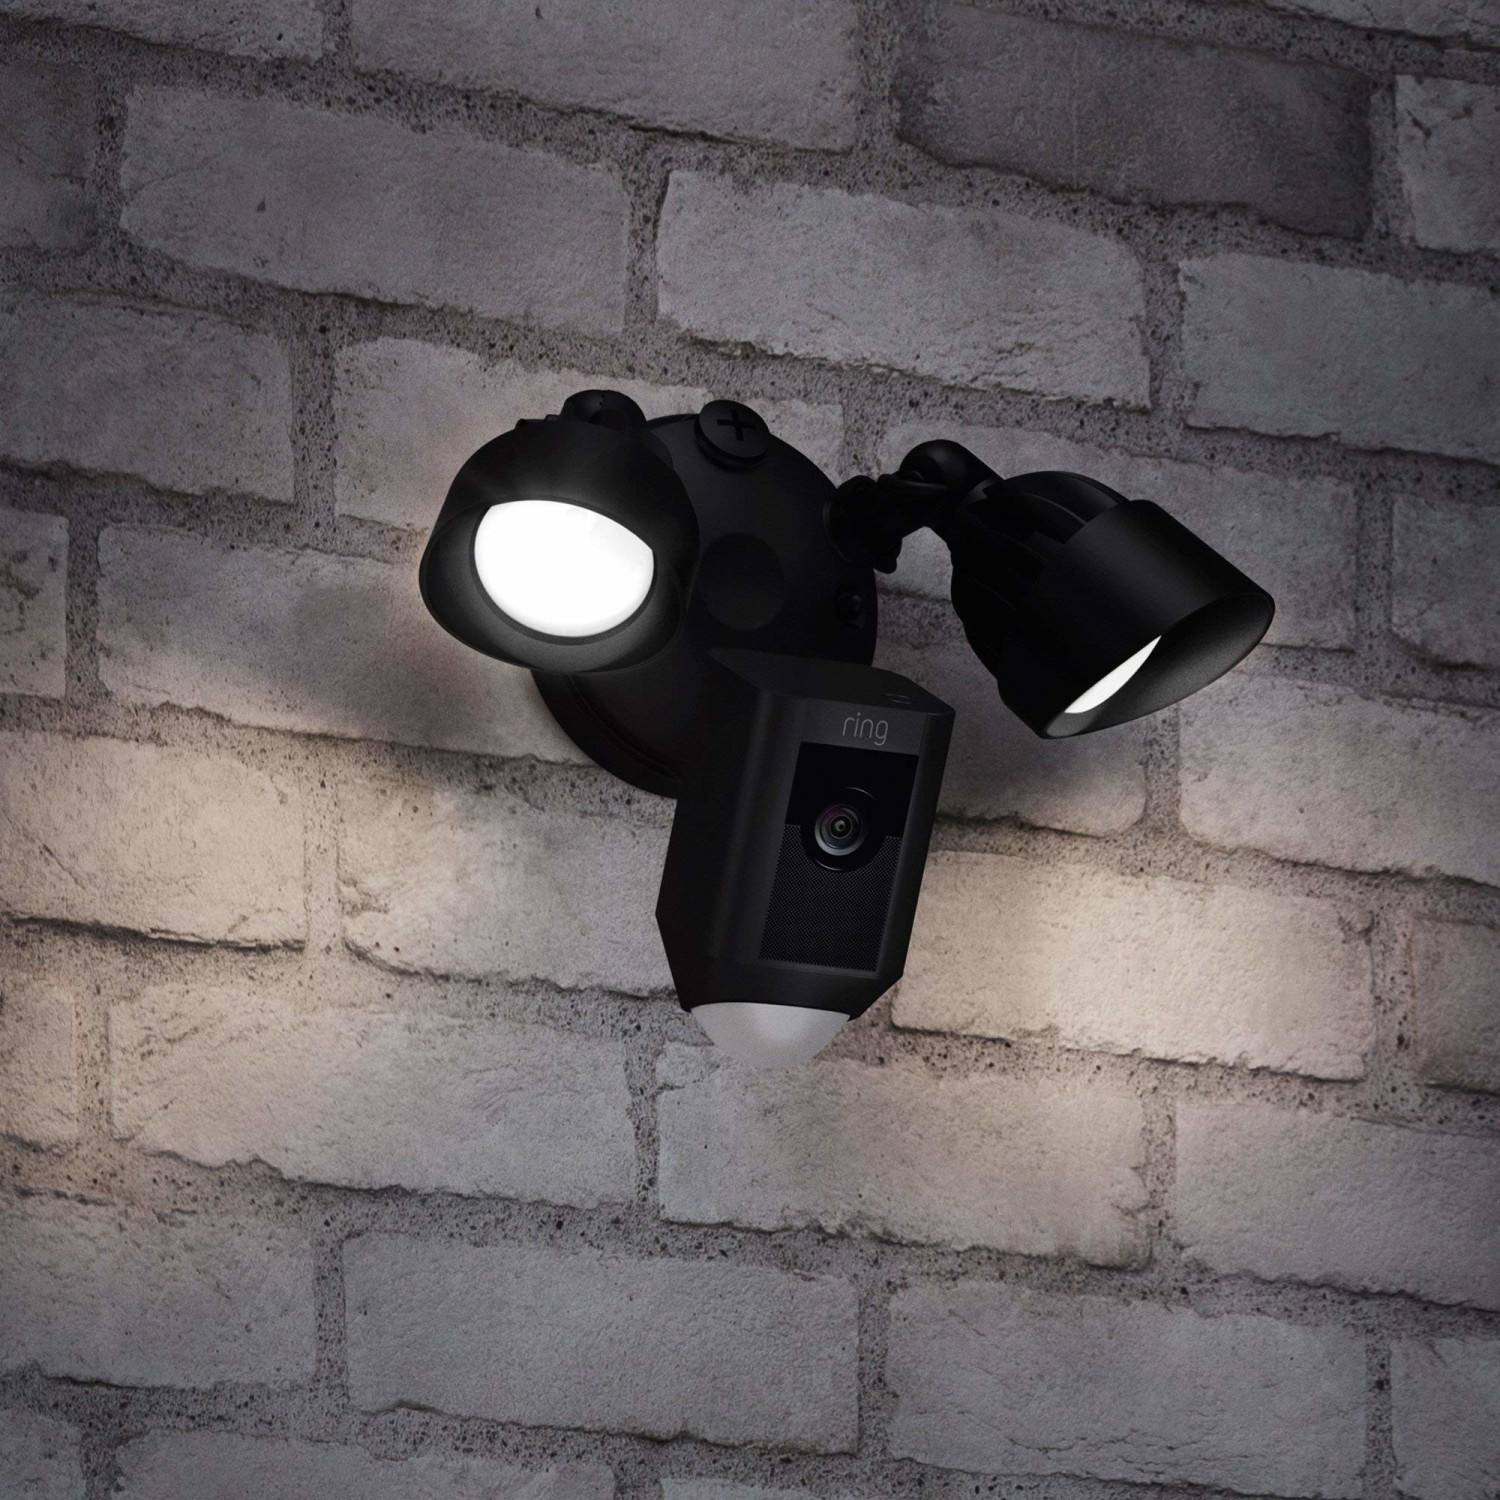 wired flood light with camera